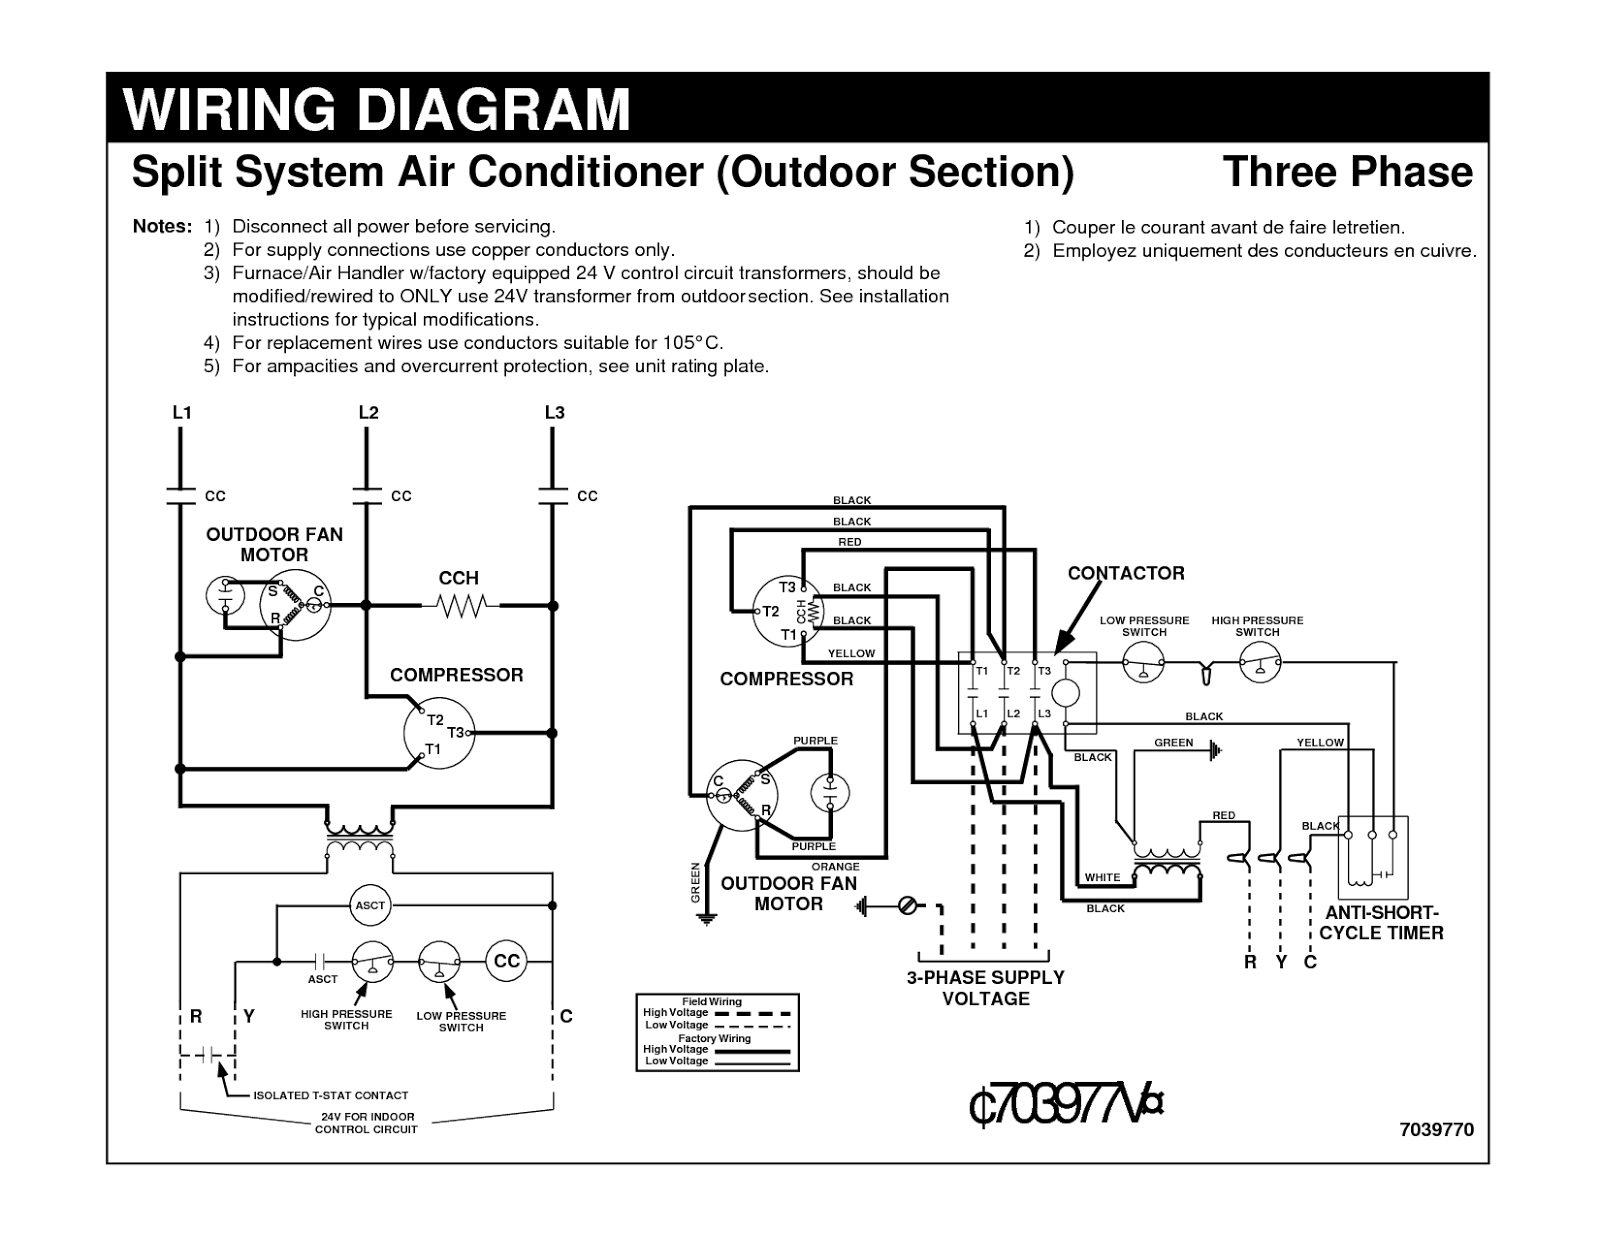 Electrical Wiring Diagrams for Air Conditioning Systems ...